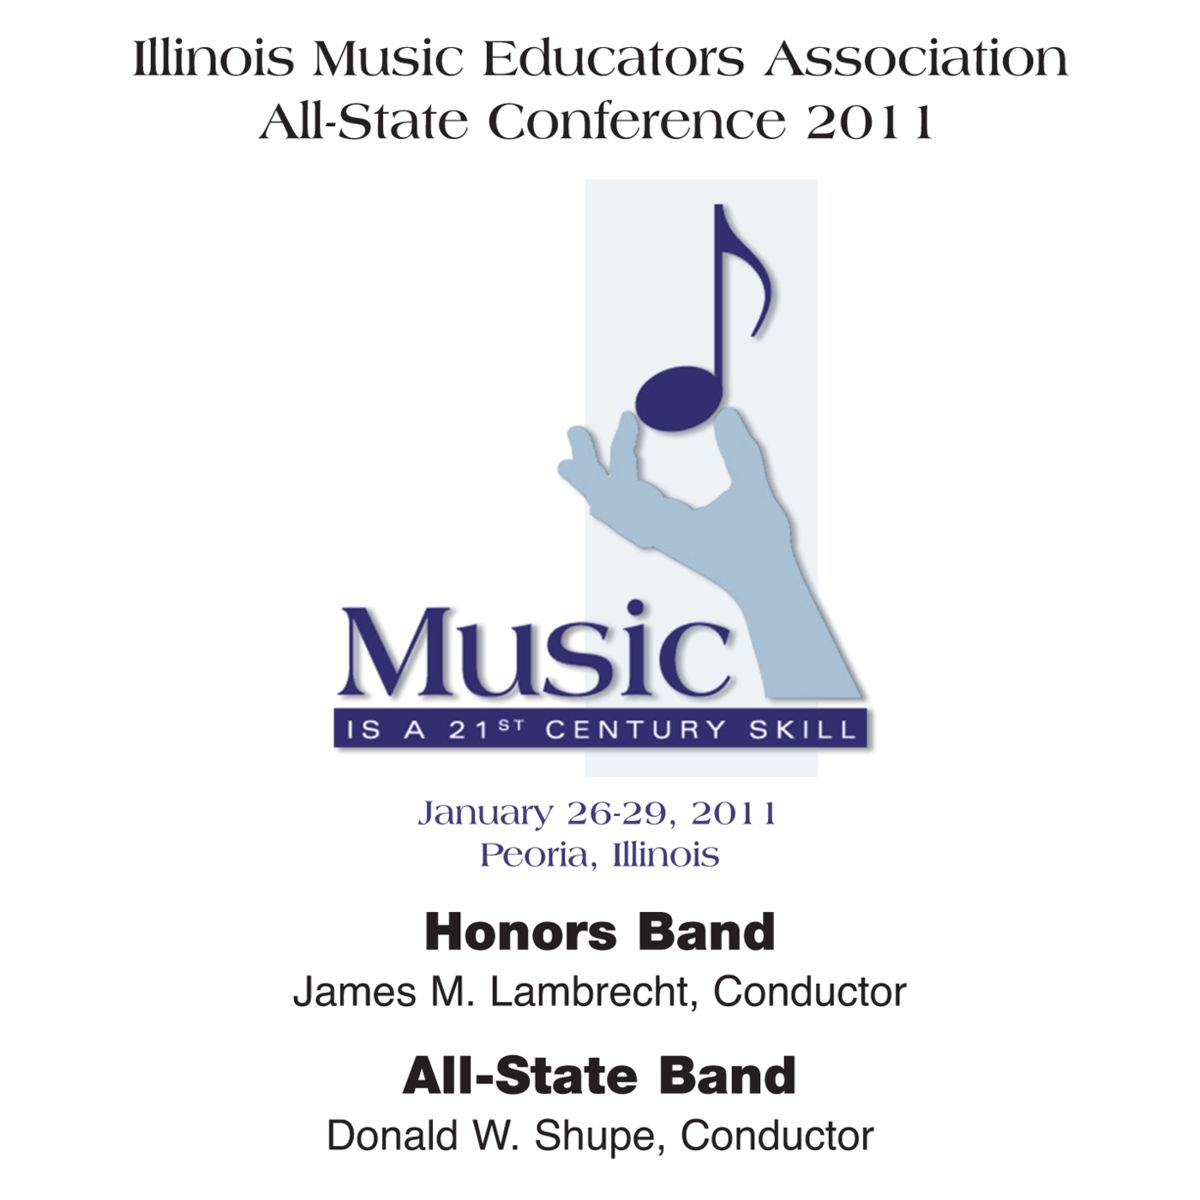 2011 Illinois Music Educators Association: Honors Band and All-State Band - hacer clic aqu